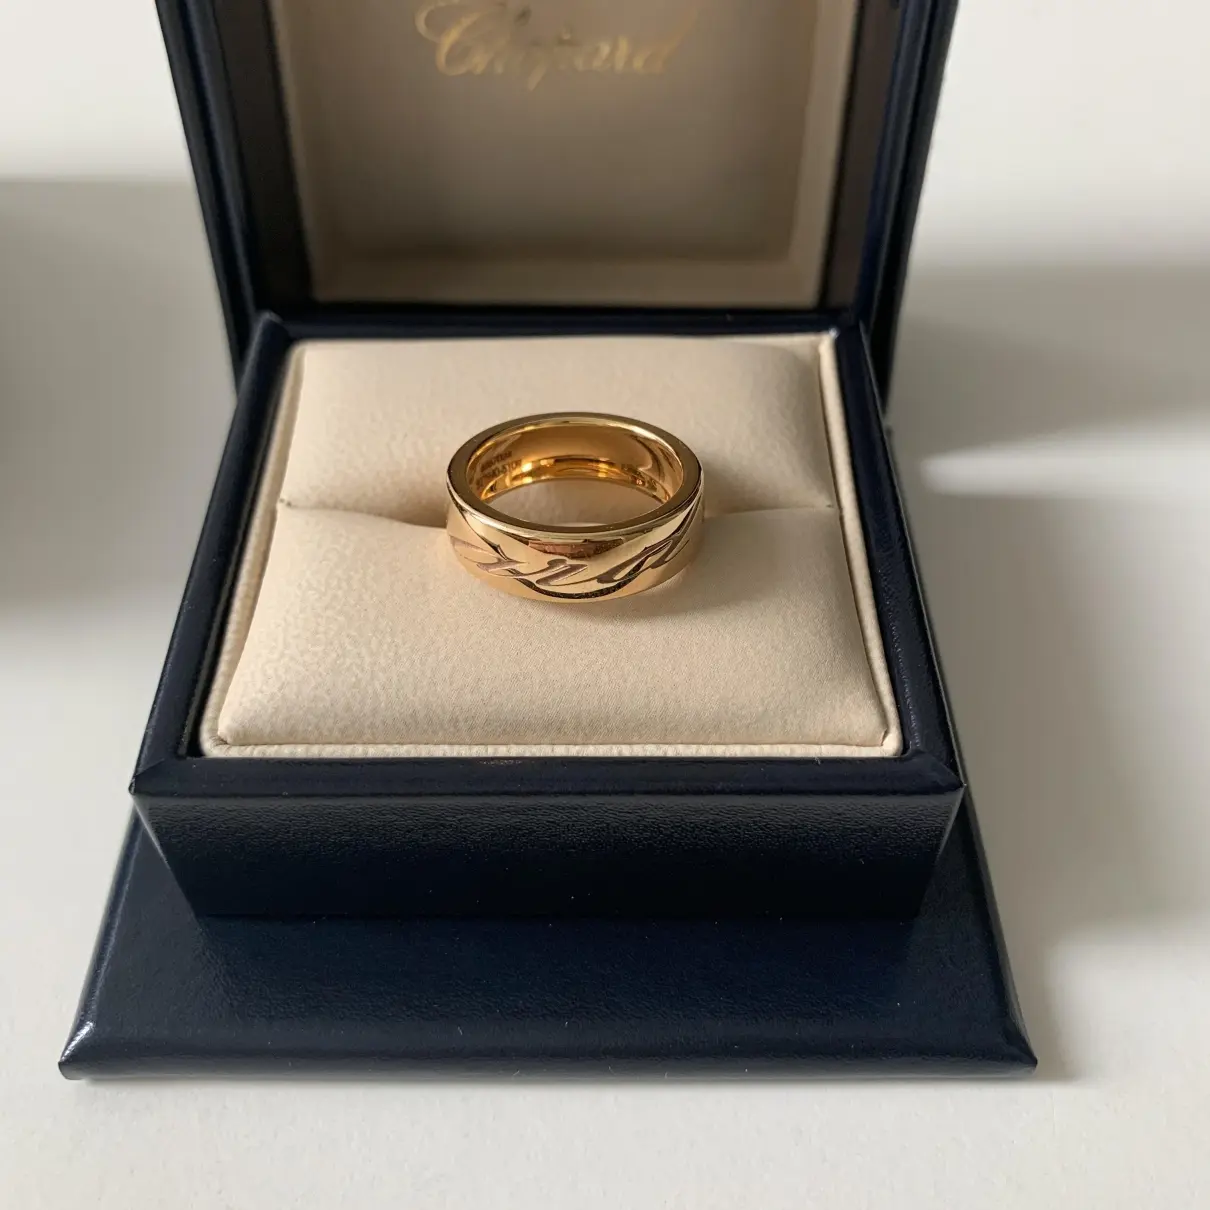 Buy Chopard Chopardissimo pink gold ring online